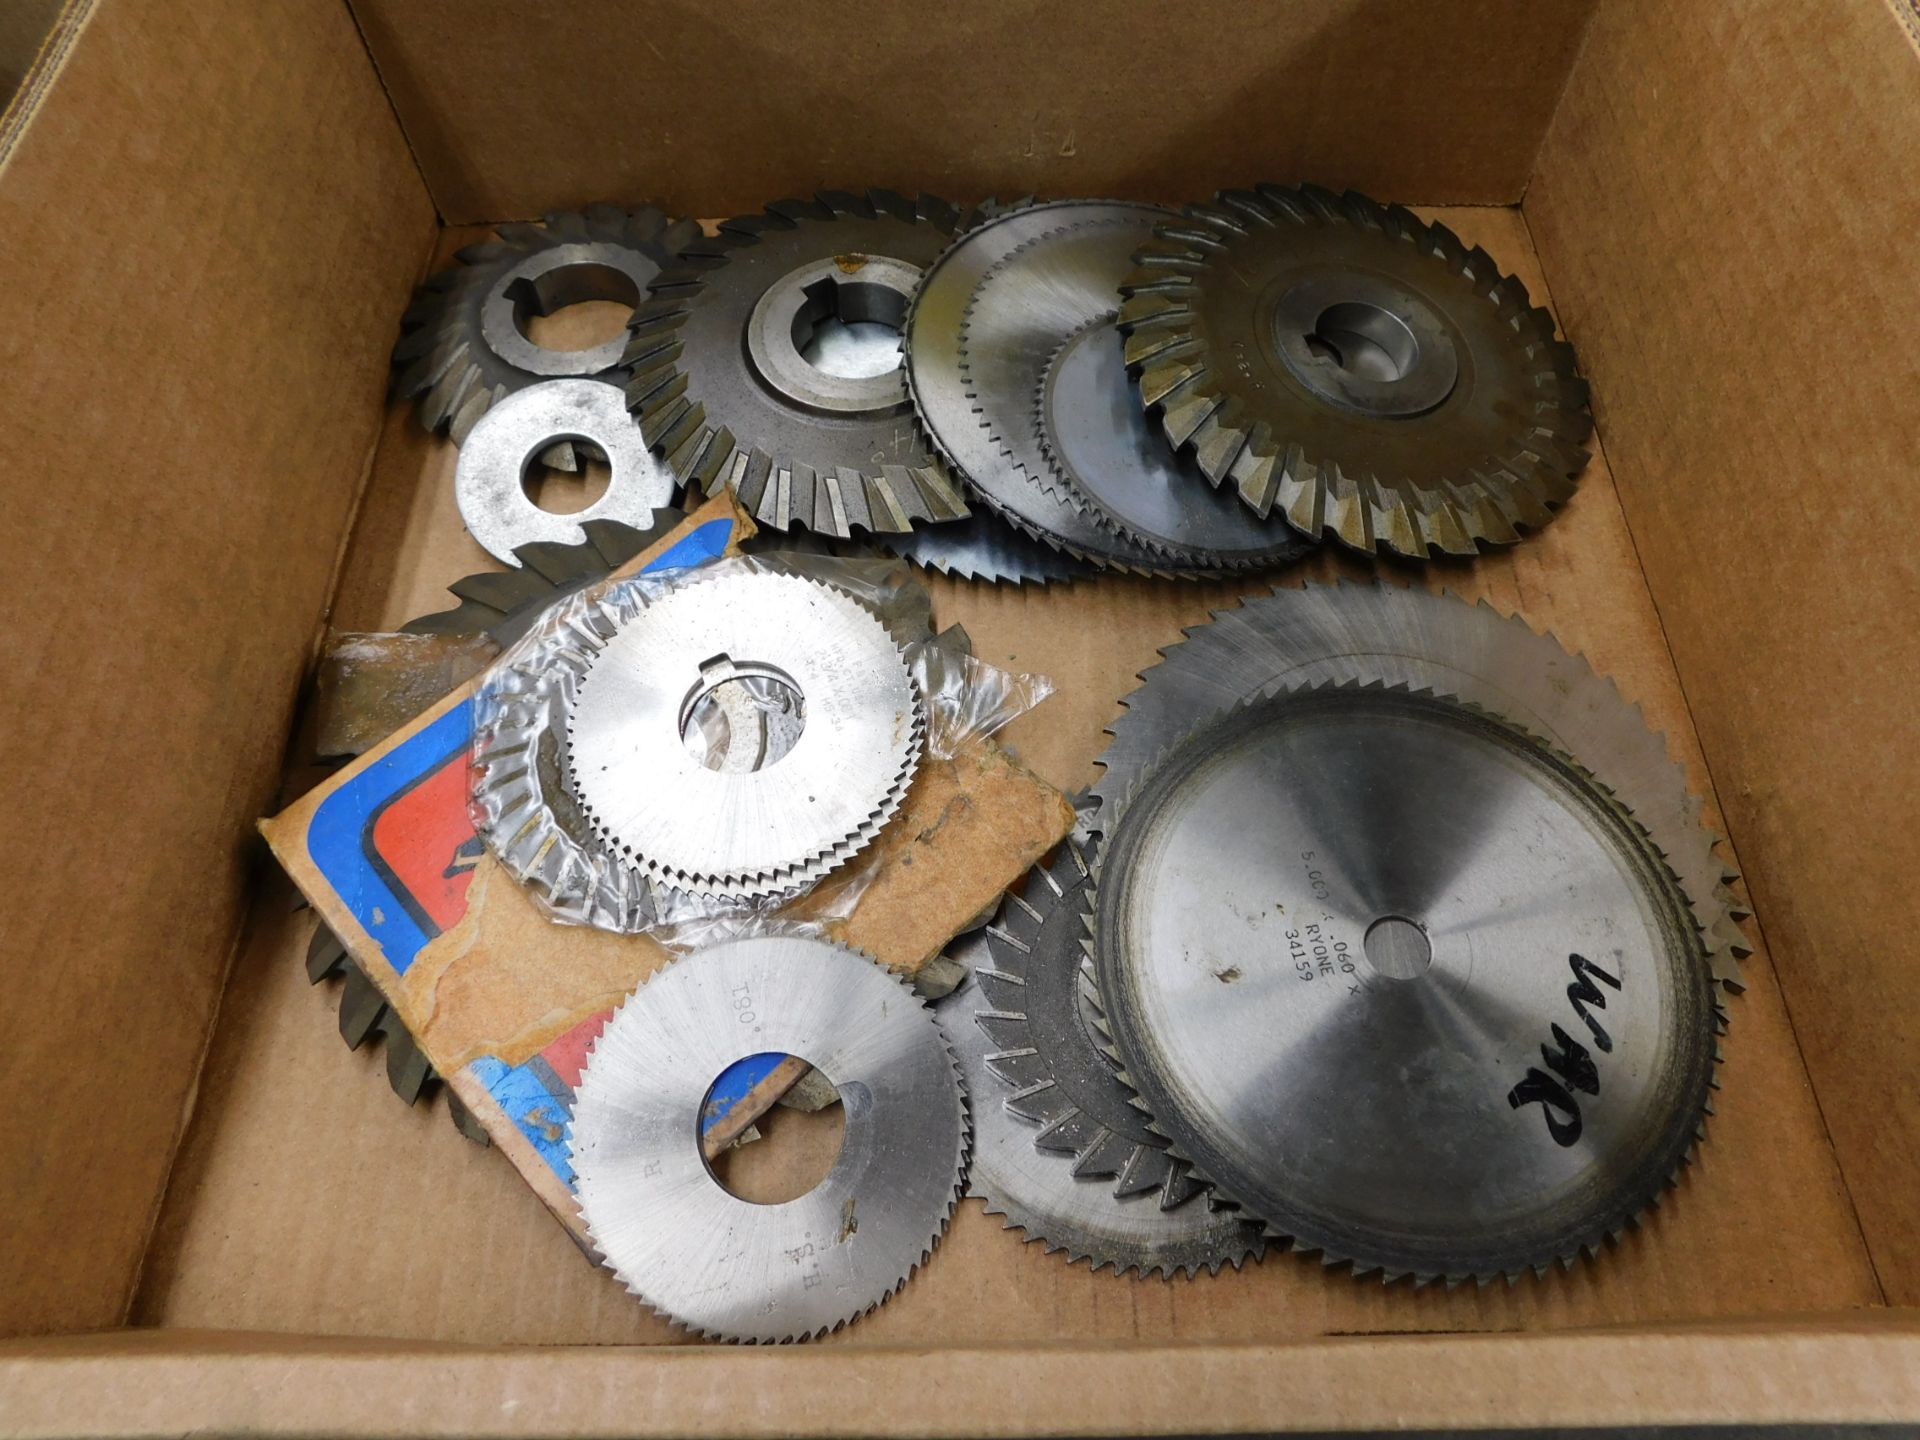 Milling Cutters and Slitting Saws